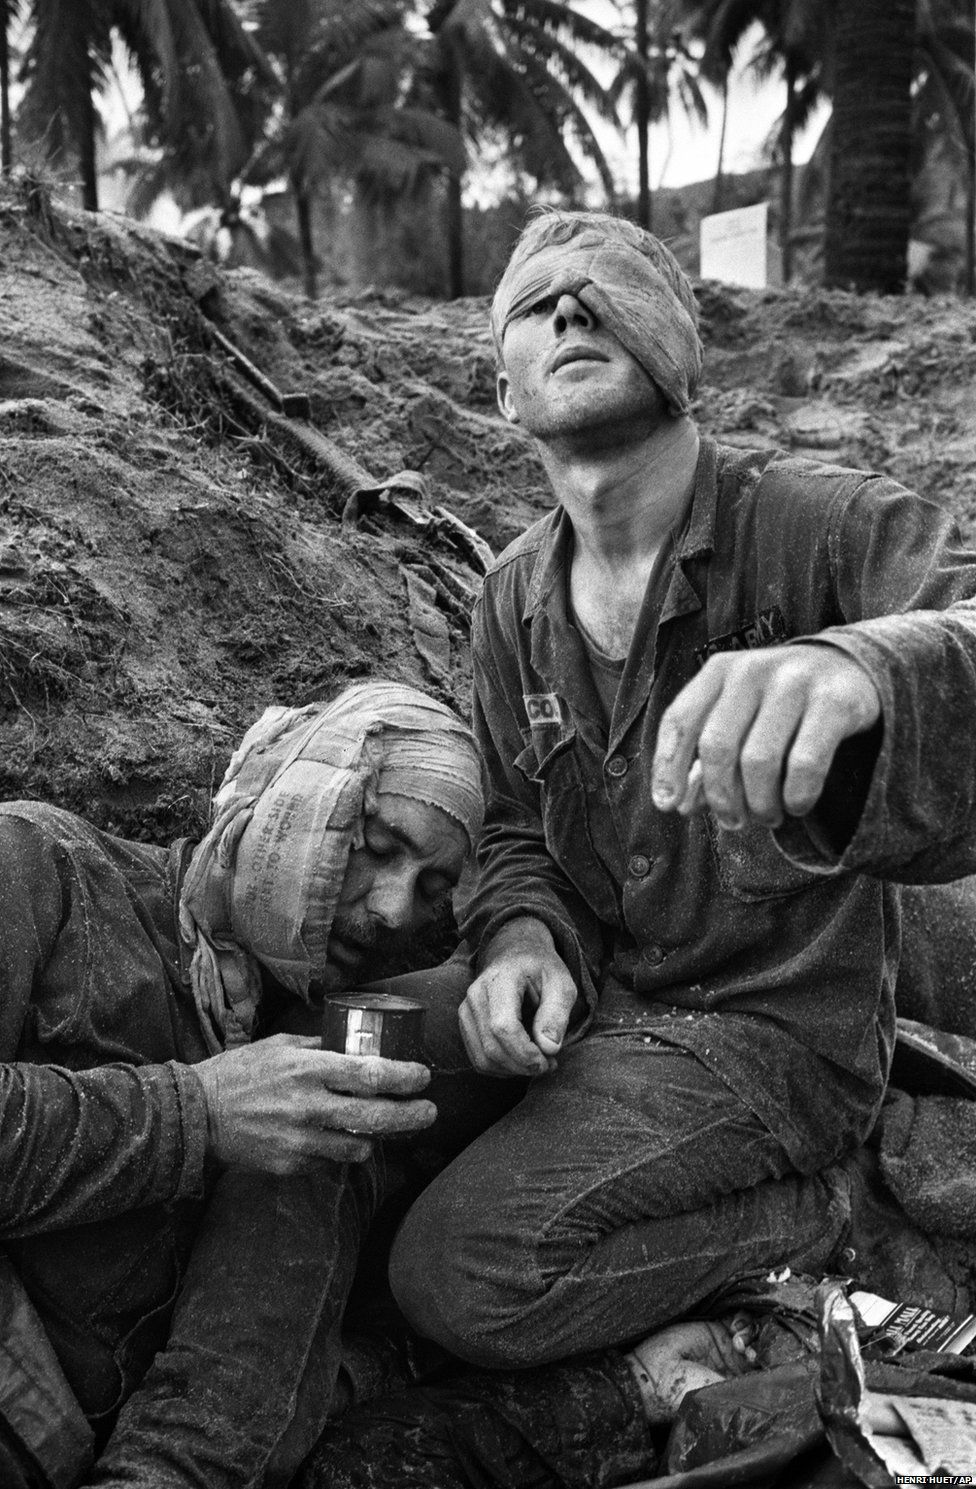 First Cavalry Division medic Thomas Cole with one of his own eyes bandaged, continues to treat wounded Staff Sgt. Harrison Pell during a 30 January 1966 fire fight at An Thi in the Central Highlands between US troops and a combined North Vietnamese and Vietcong force